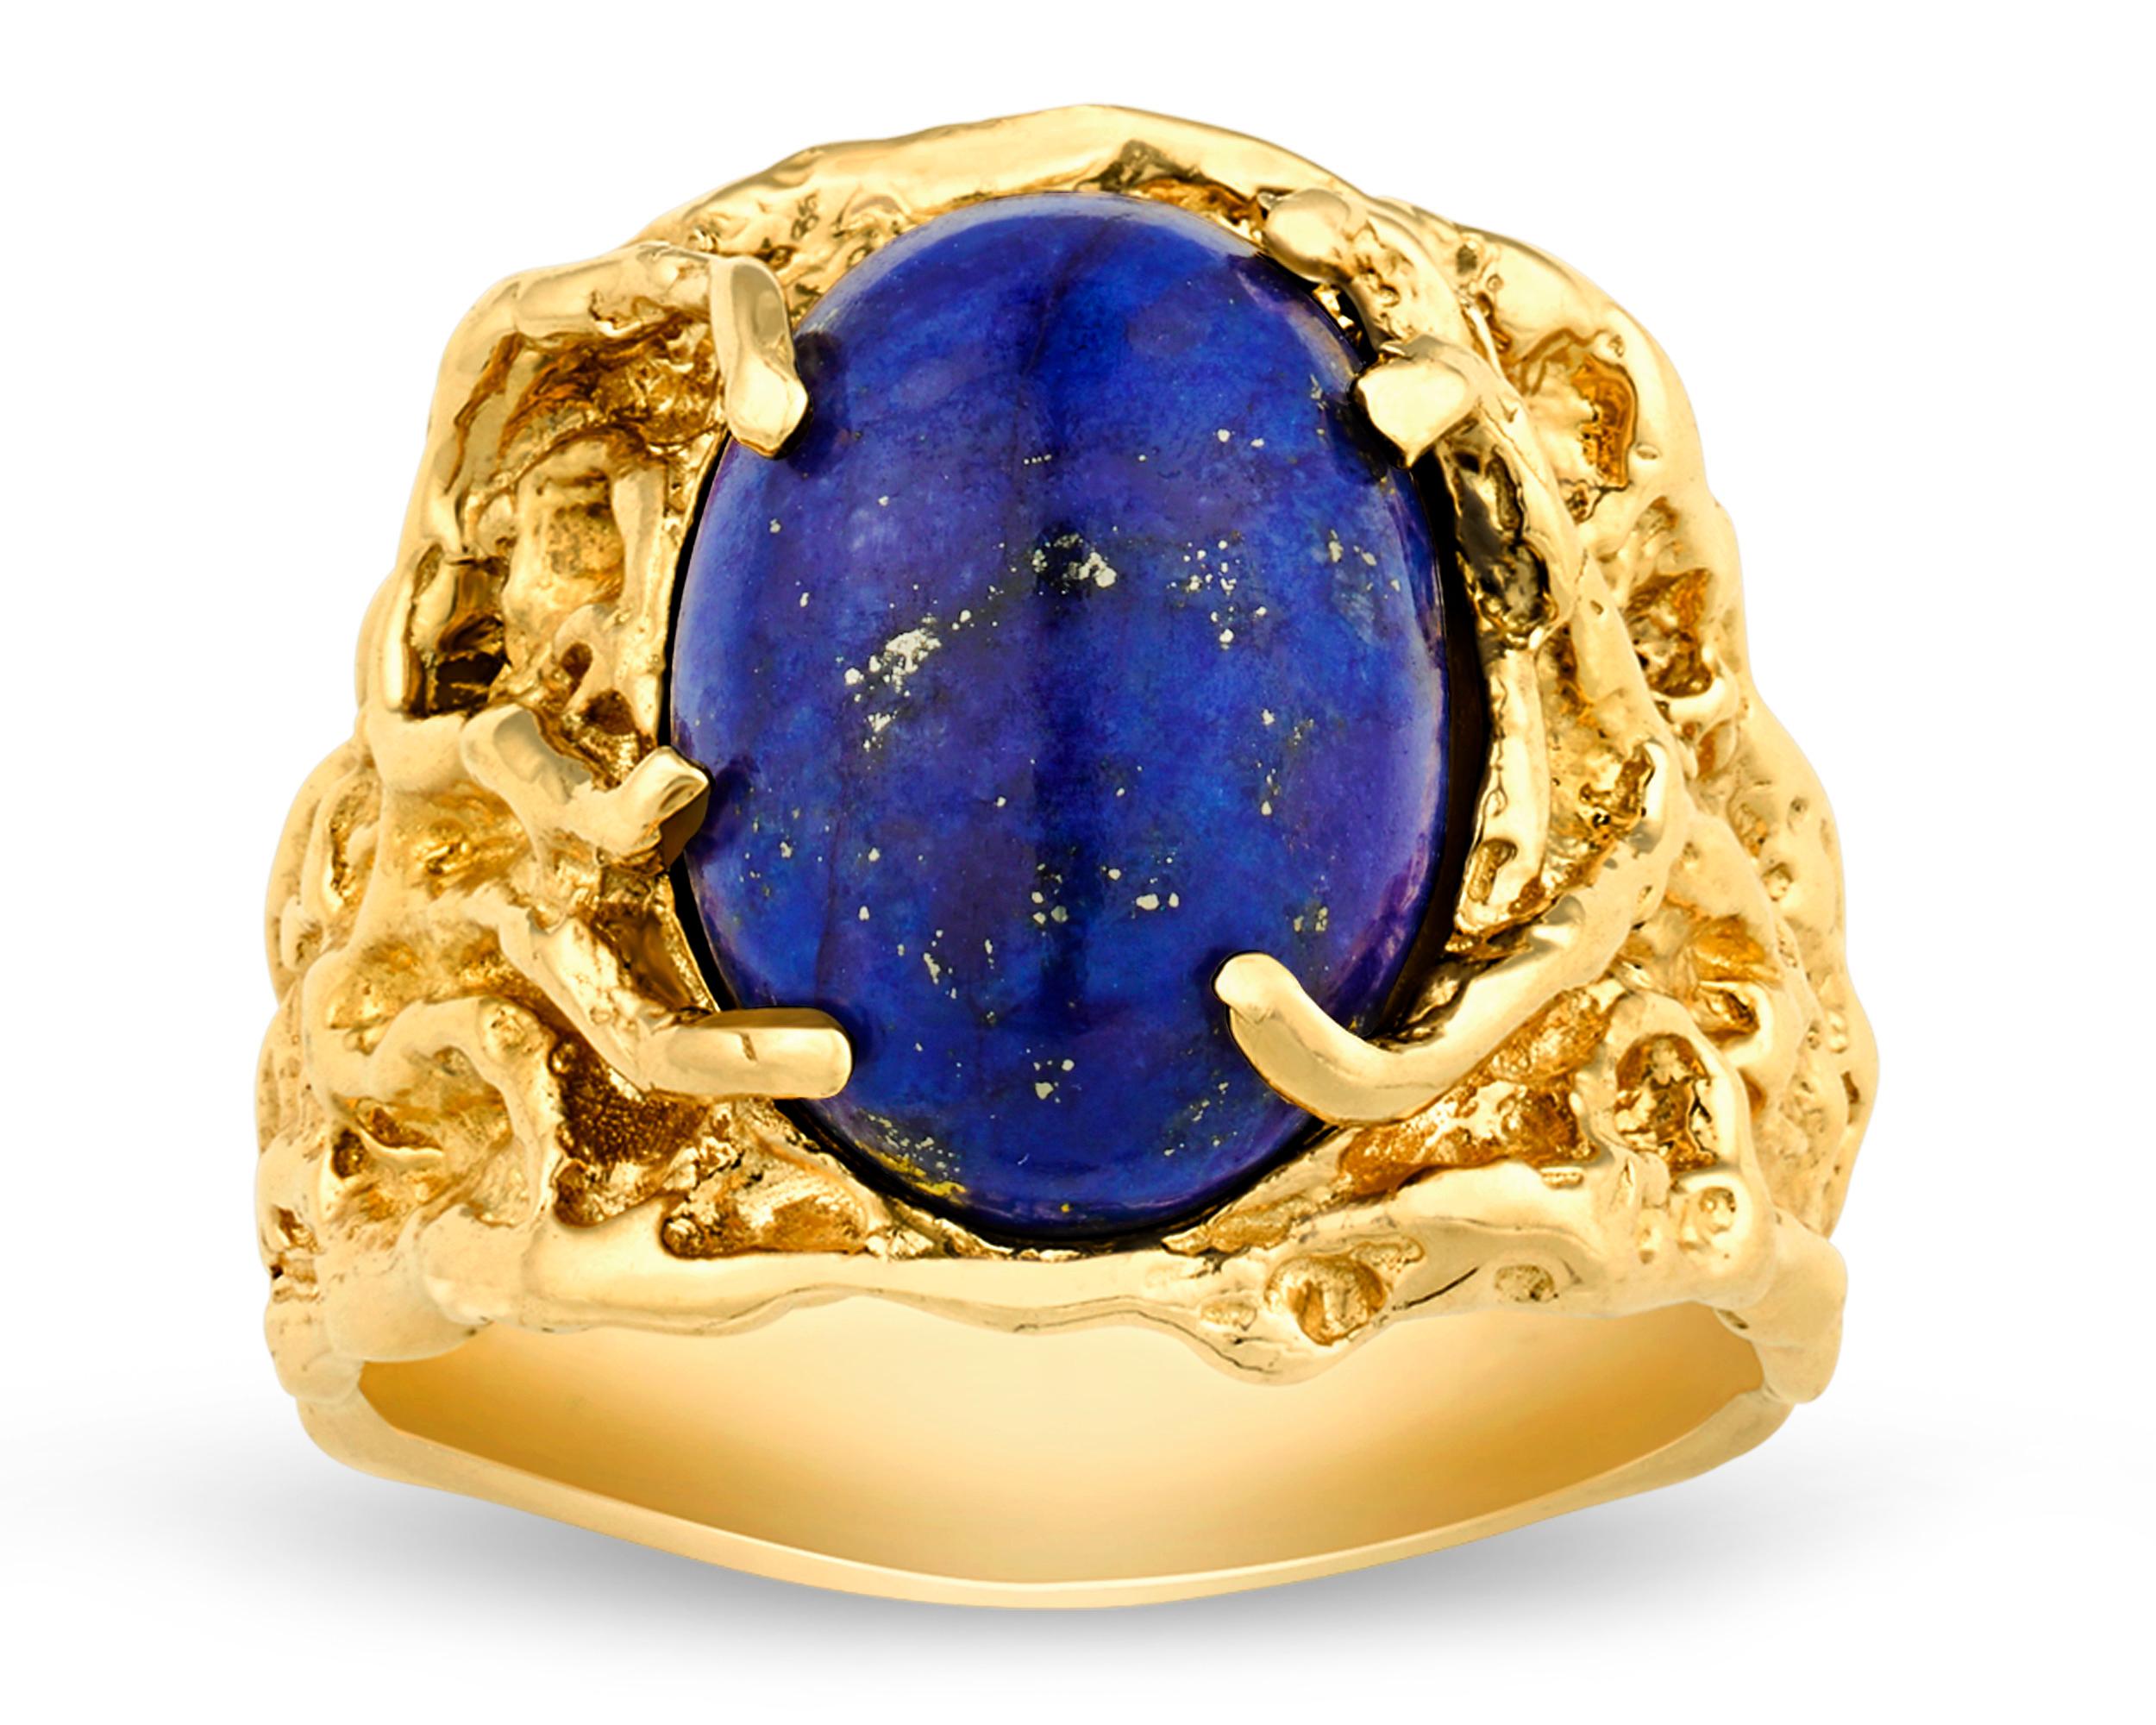 This fascinating ring was owned and worn on stage by perhaps the most celebrated cultural icon of the 20th century, the King himself, Elvis Presley. The jewelry creation features a large, vibrant blue lapis cabochon surrounded by a highly unique 14K